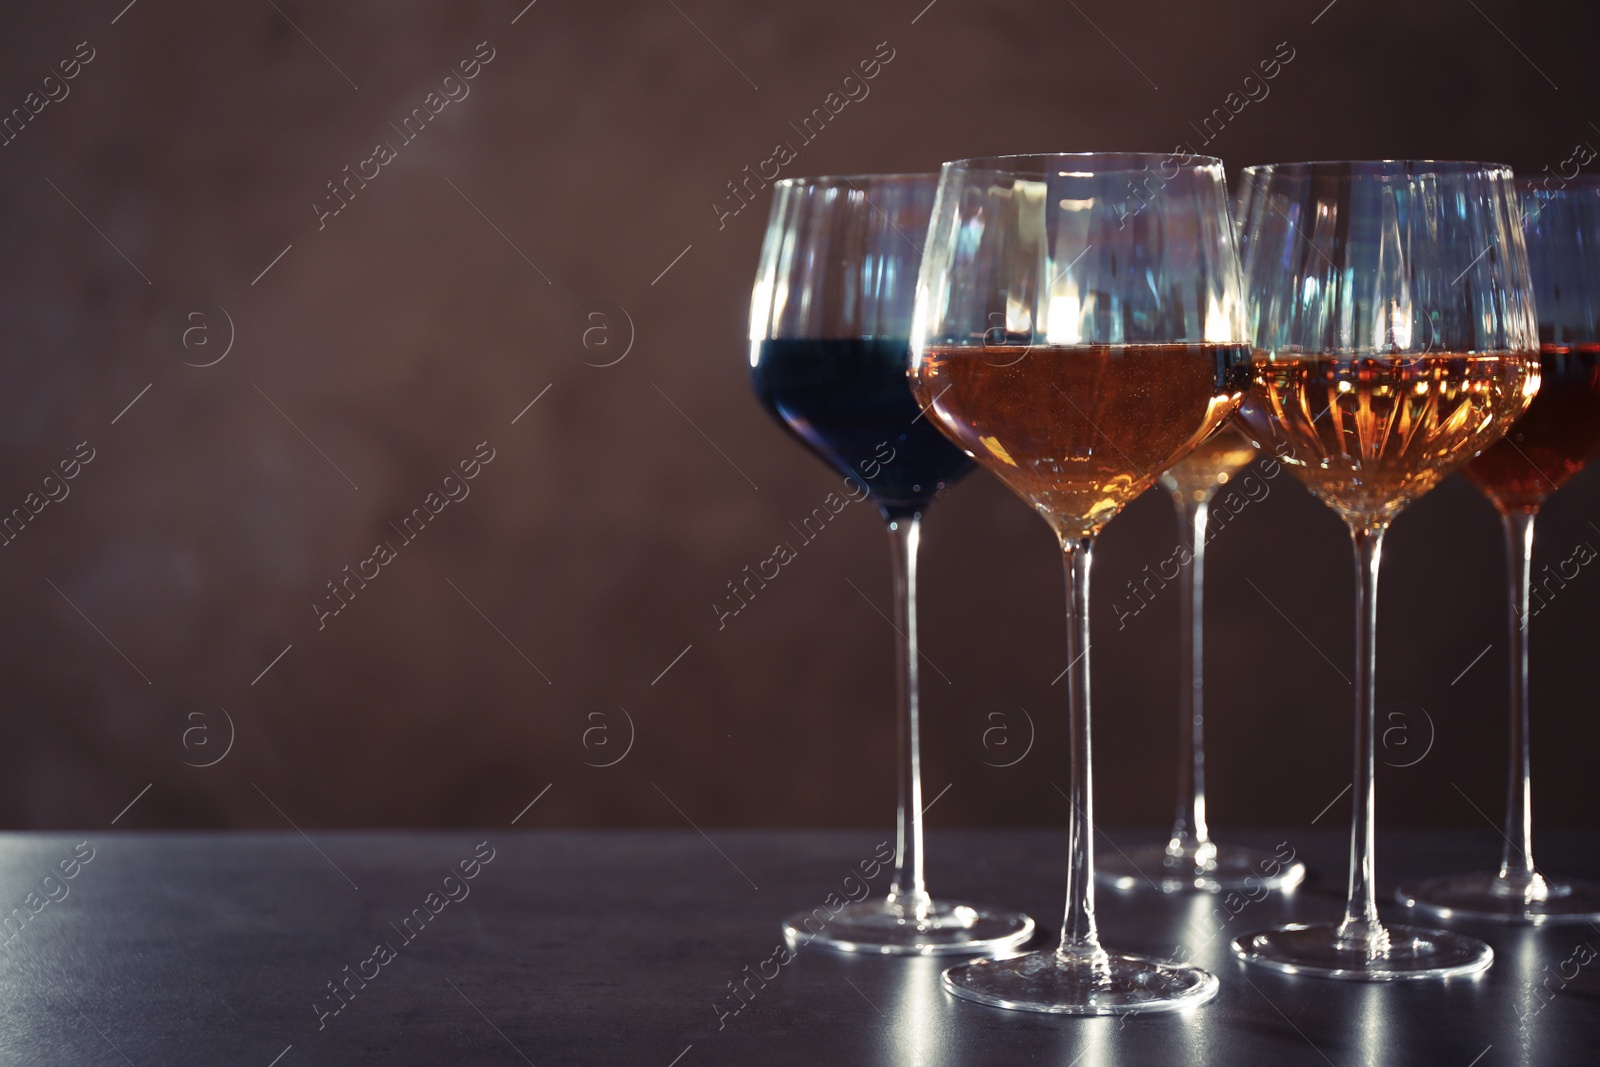 Photo of Elegant glasses with different wines on table against brown background